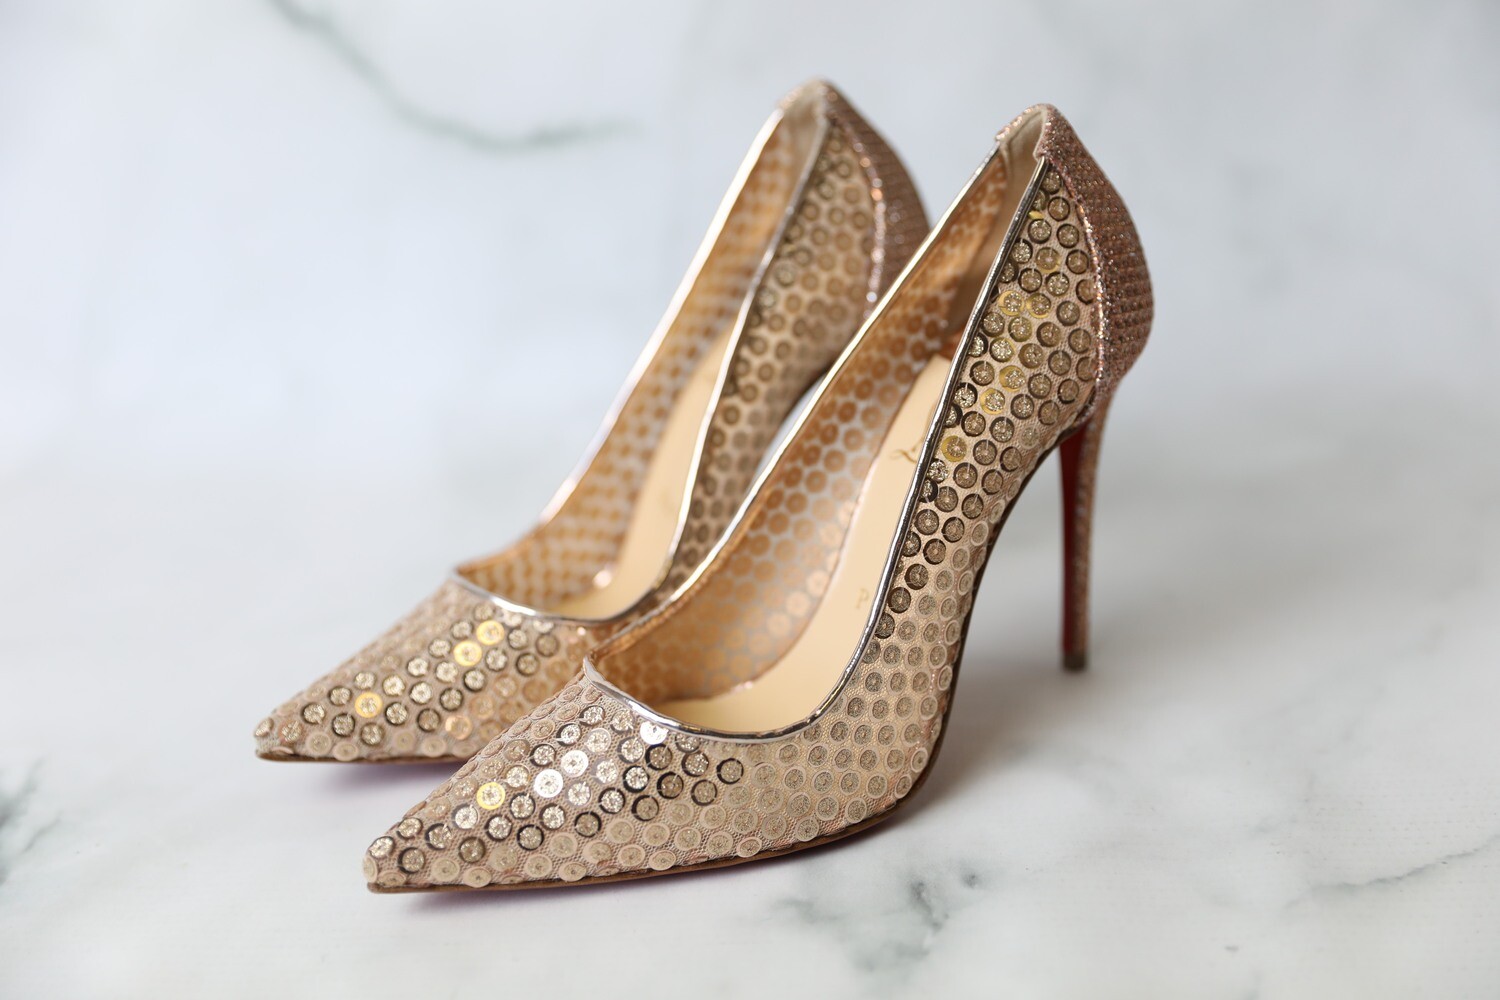 Christian Louboutin Shoes 554 Lace Sequin Nude Gold Point-toe Heels Pumps  100mm, New in Box WA001 - Julia Rose Boston | Shop